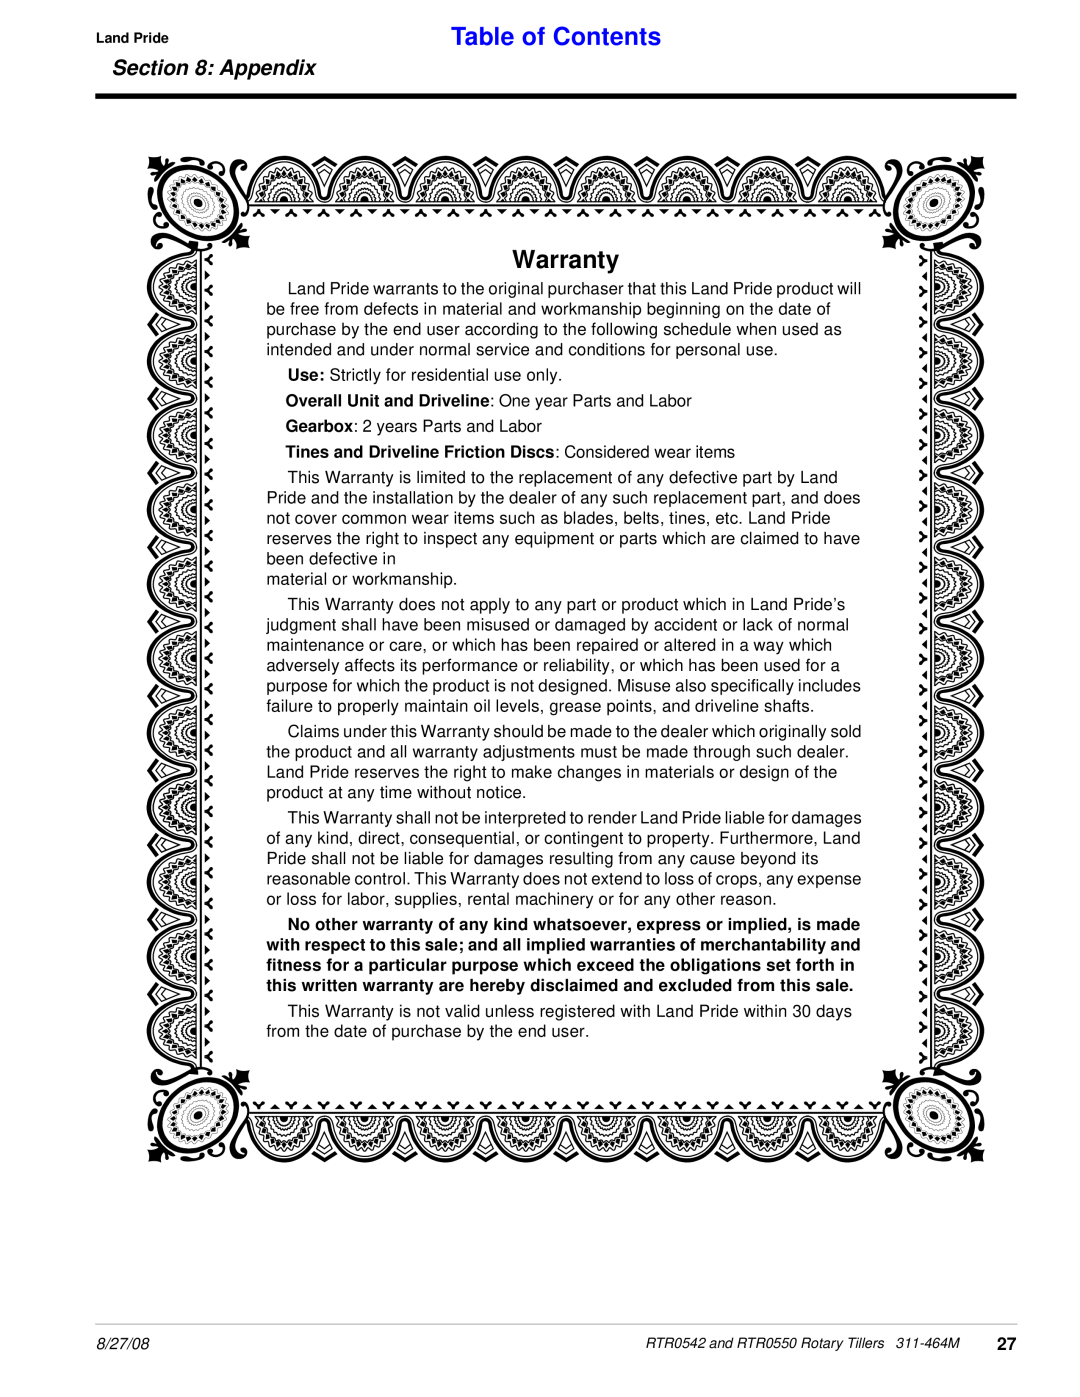 Land Pride RTR0550, RTR0542 manual Warranty, Table of Contents, Appendix 